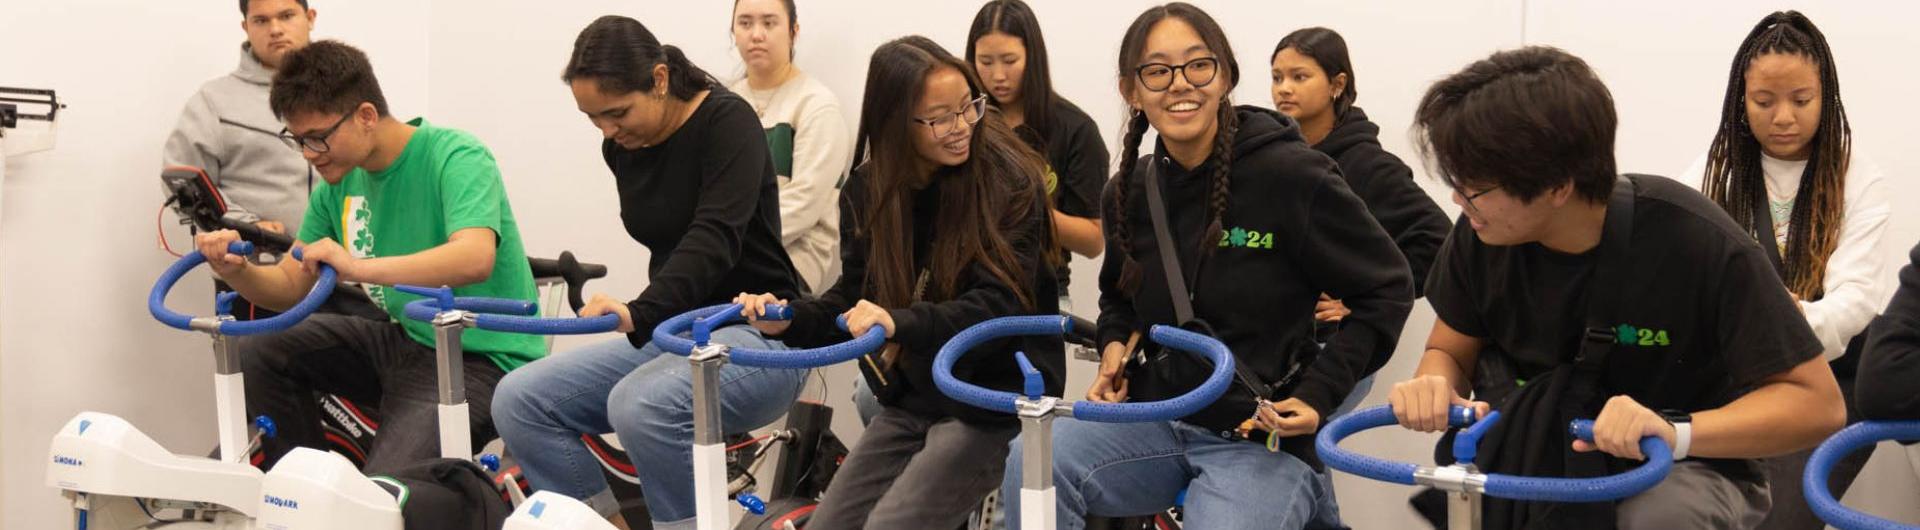 Students on stationary bikes